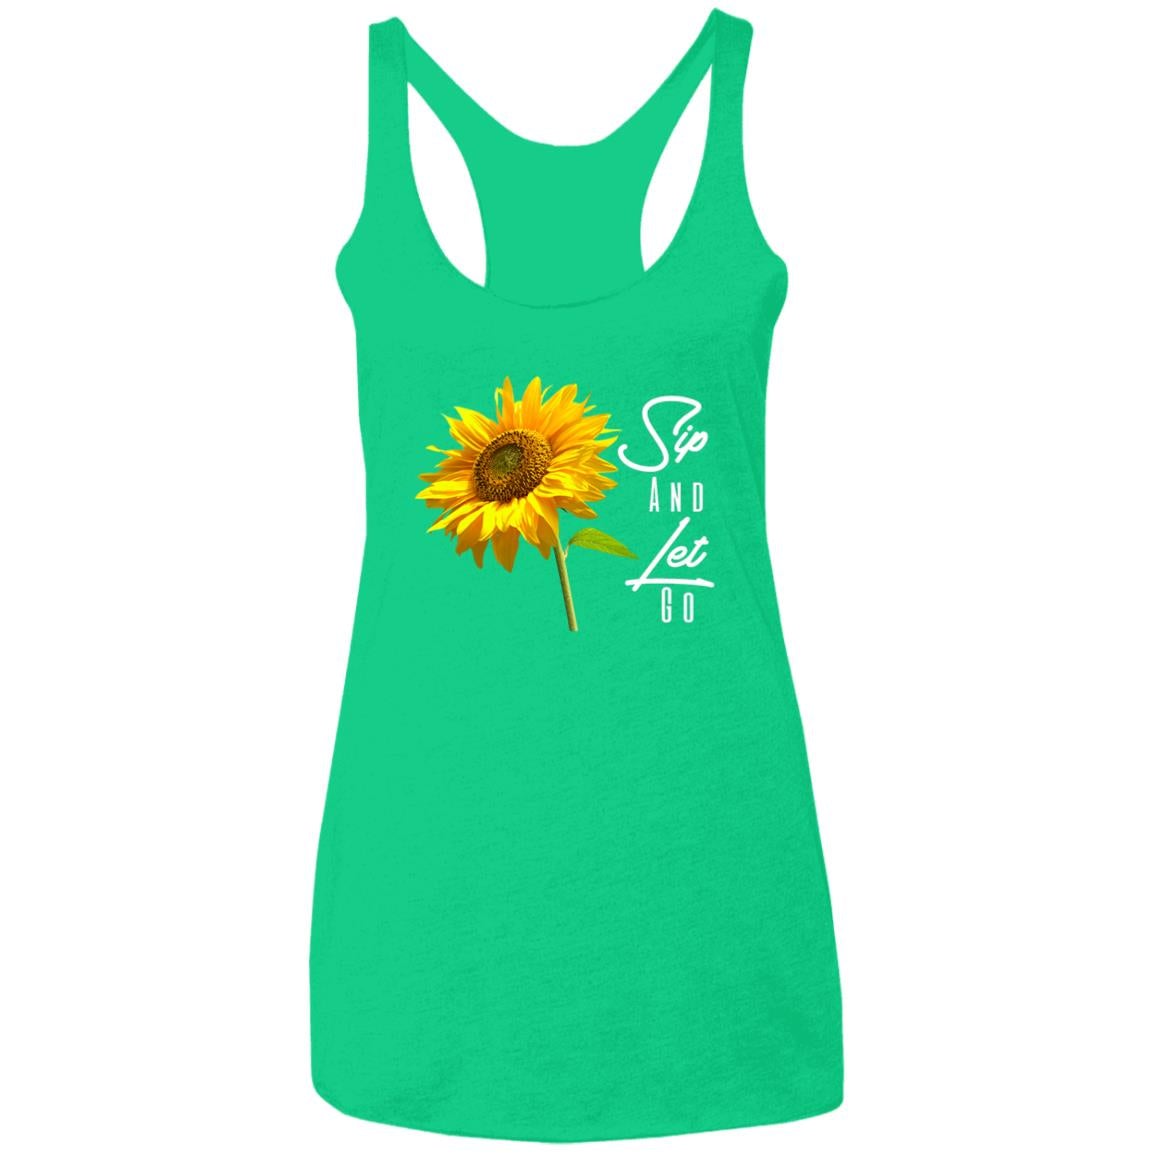 Sip And Let Go Women's Tank Top Envy - Loyalty Vibes